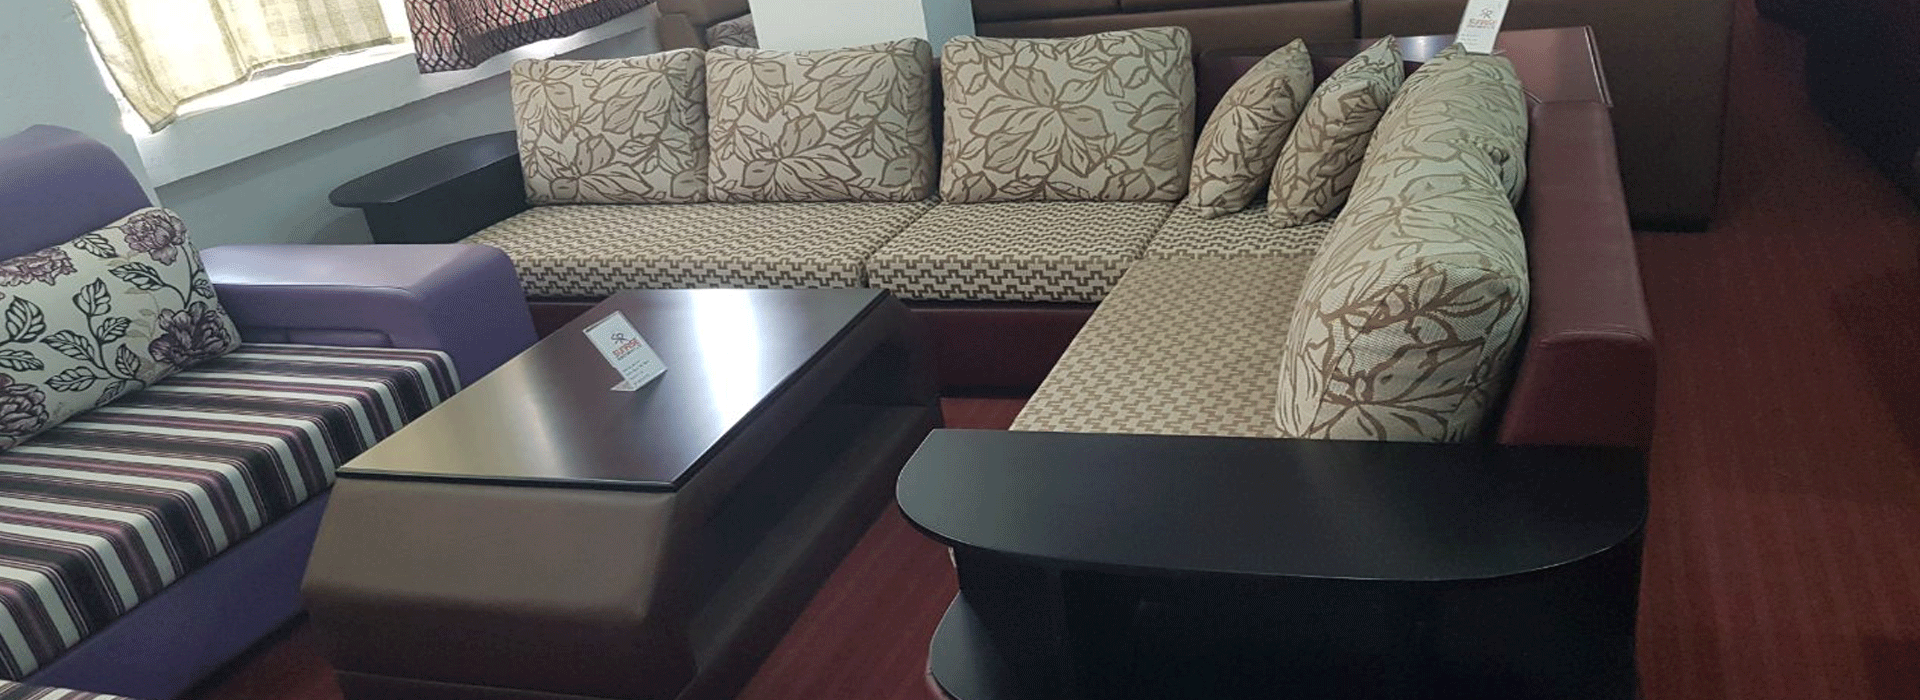 corporate sofa for home office school colleges nepal